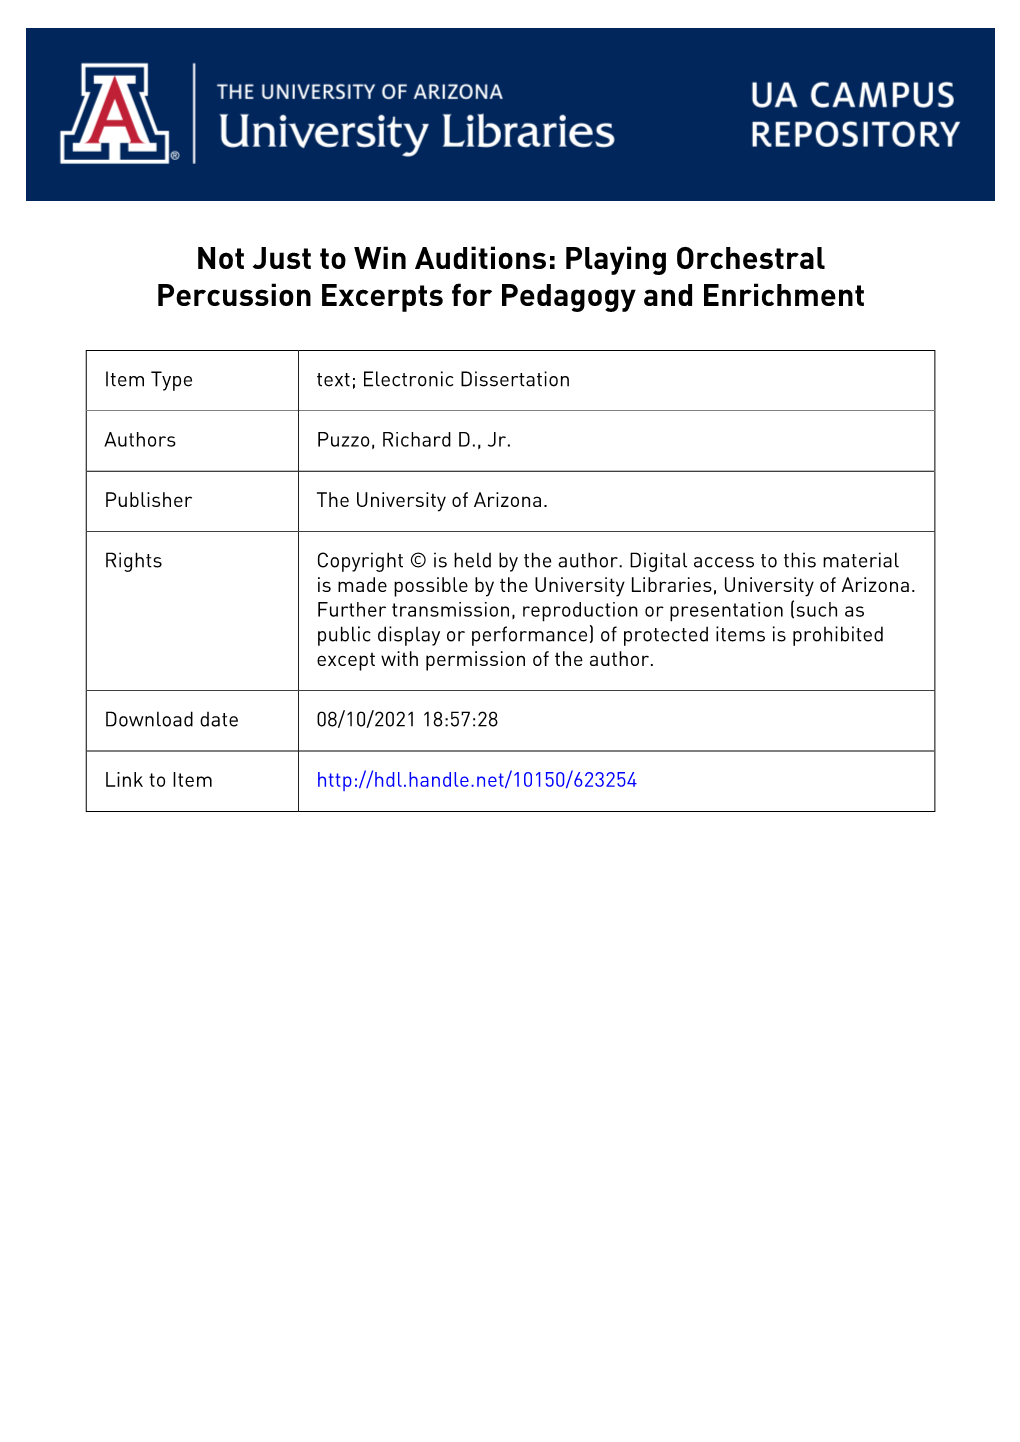 NOT JUST to WIN AUDITIONS: PLAYING ORCHESTRAL PERCUSSION EXCERPTS for PEDAGOGY and ENRICHMENT by Richard David Puzzo, Jr a Docum